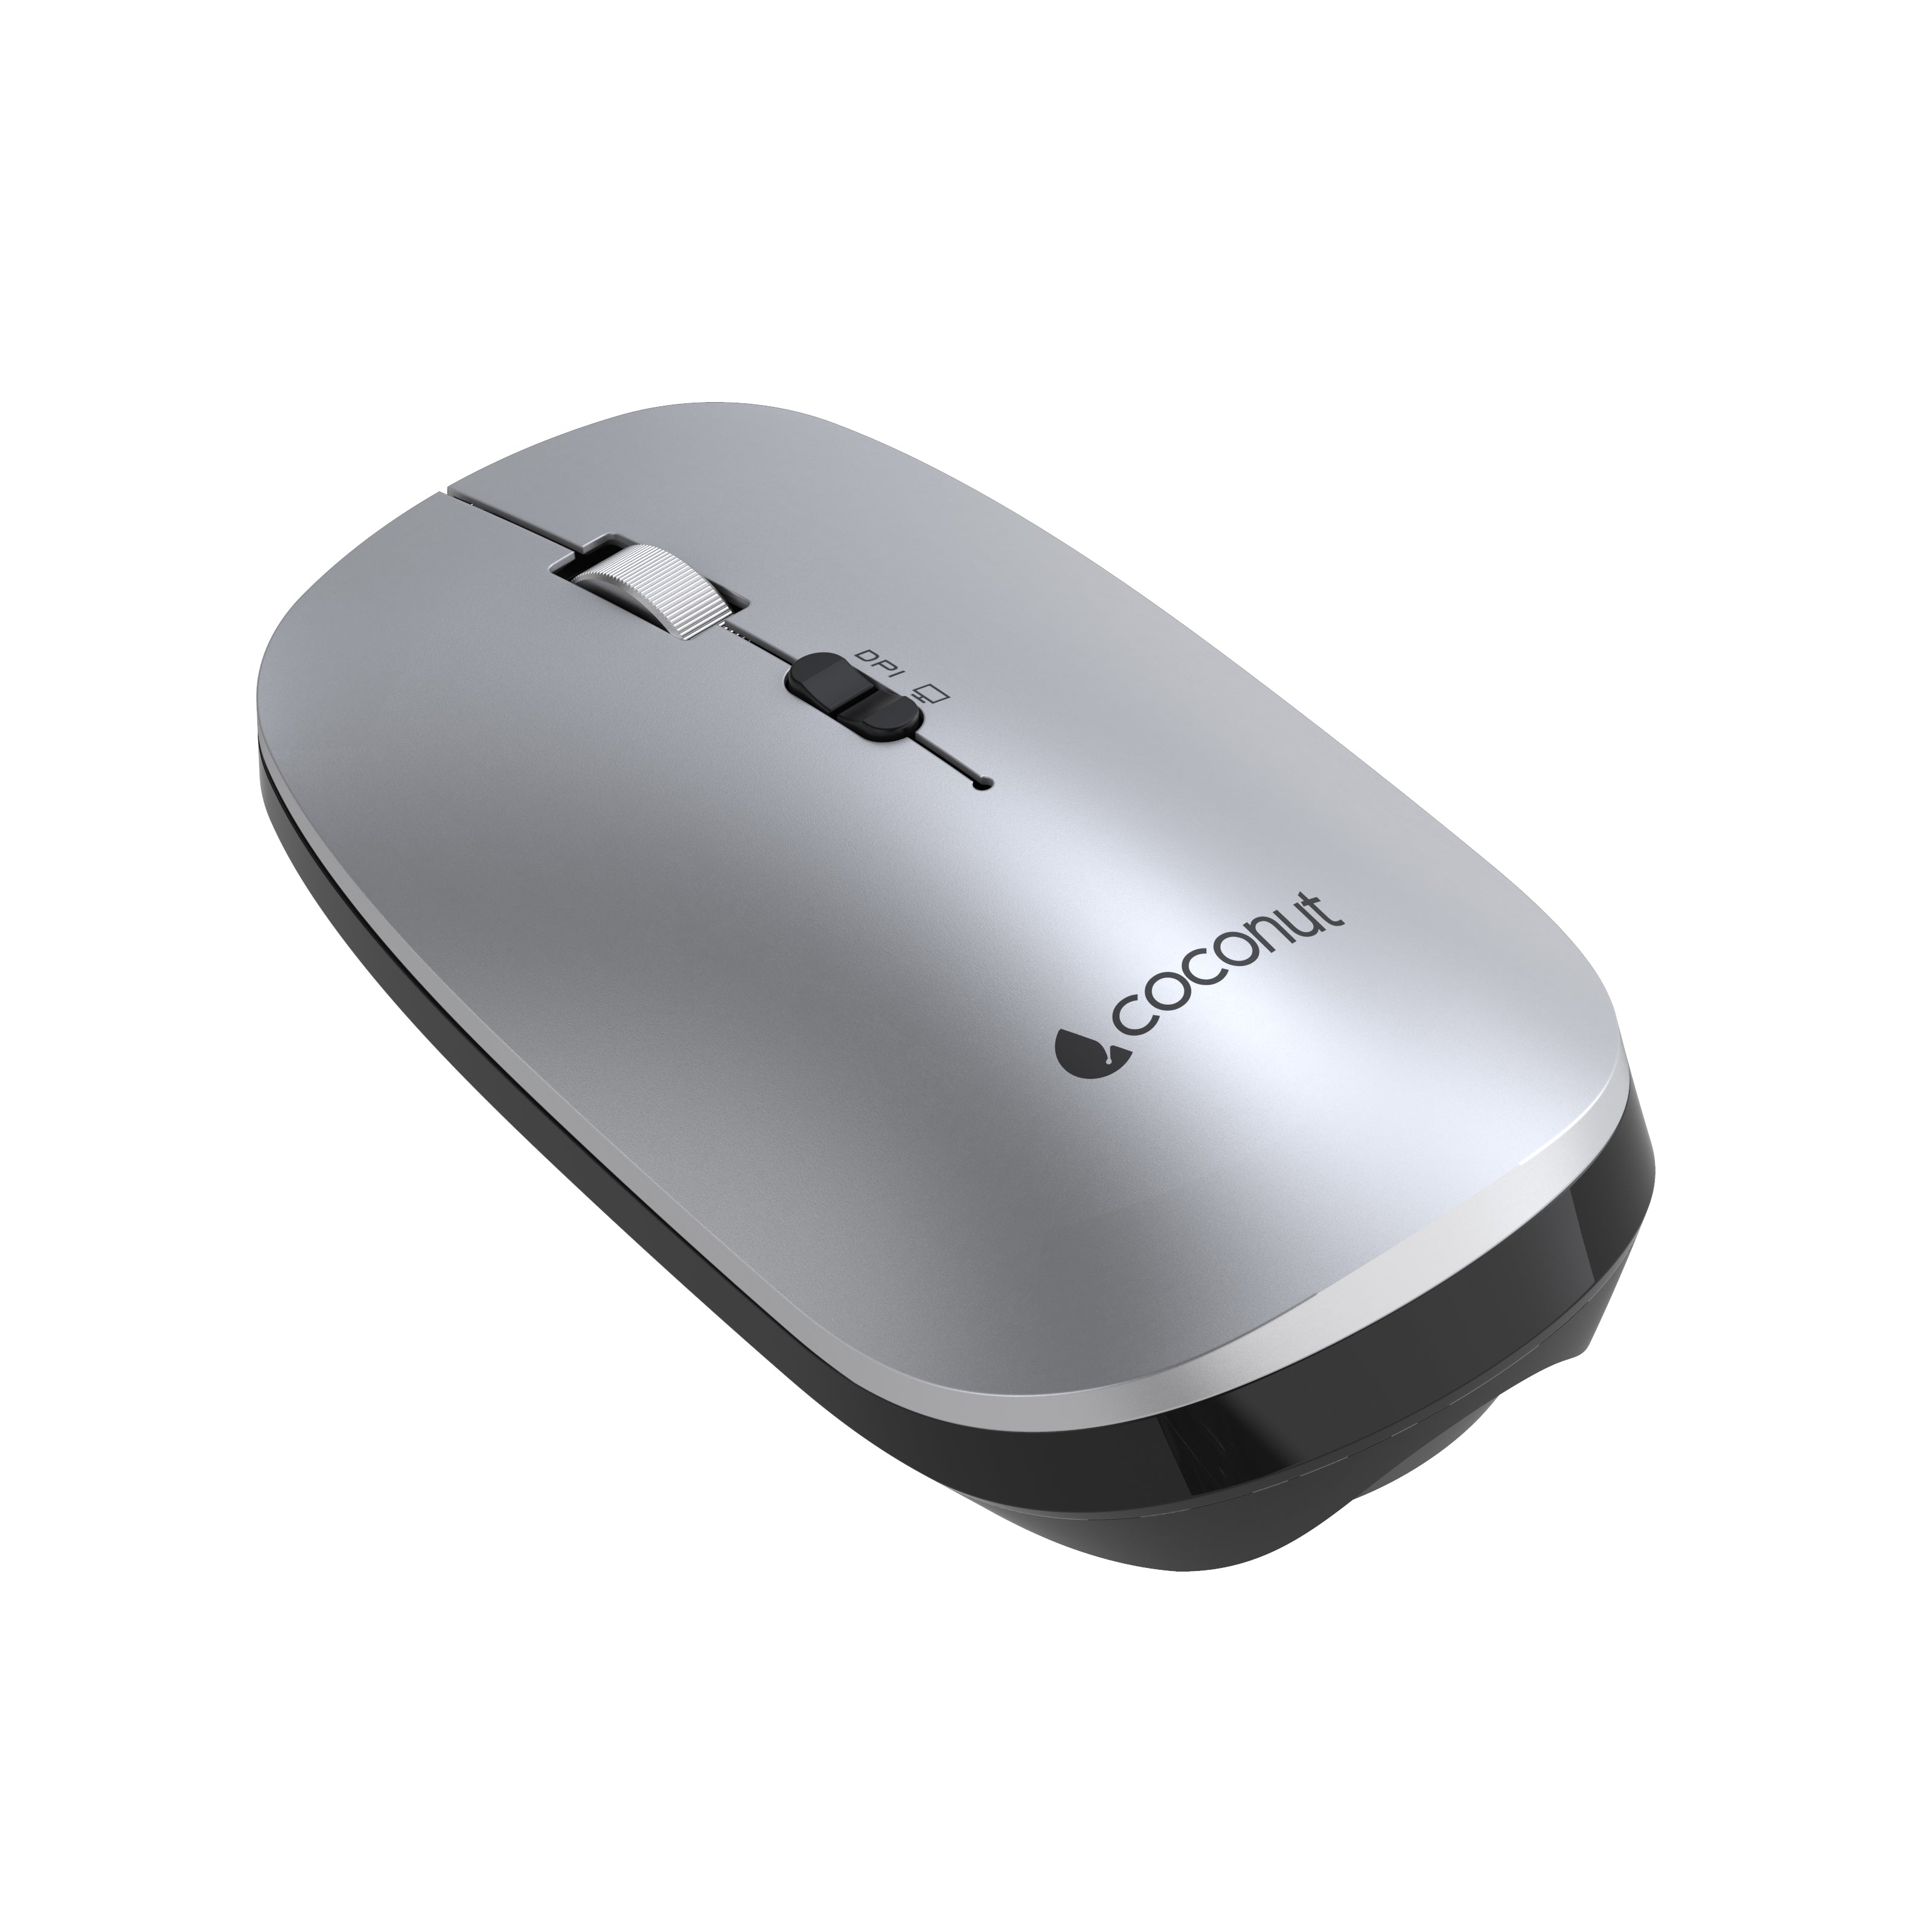 Star Wireless Mouse with Dedicated Minimize button